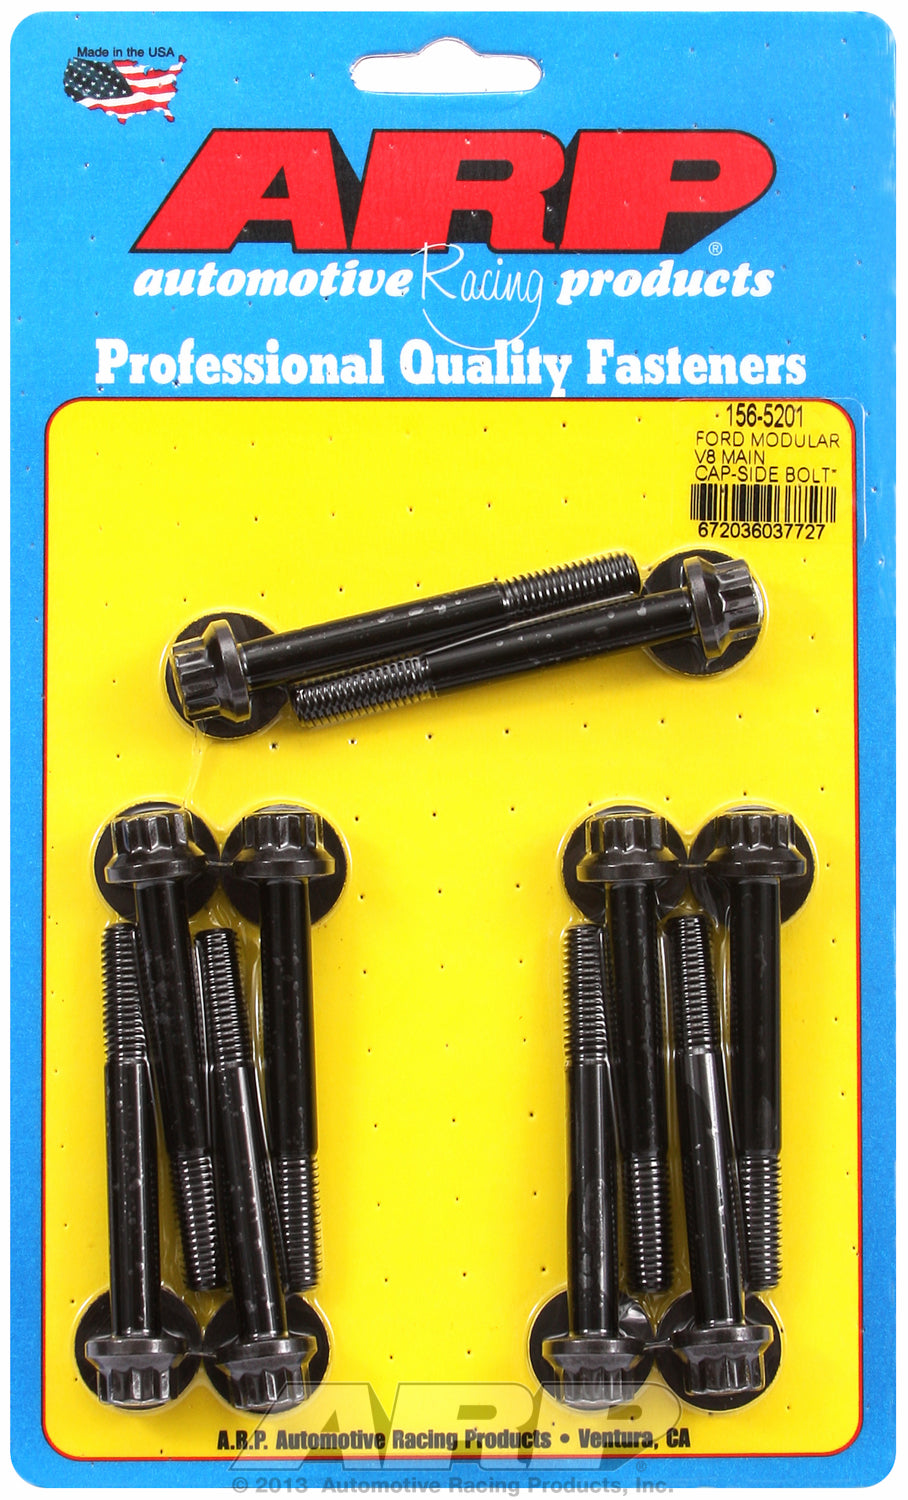 Main Stud Kit for Ford Side bolts - Early cast iron block M8